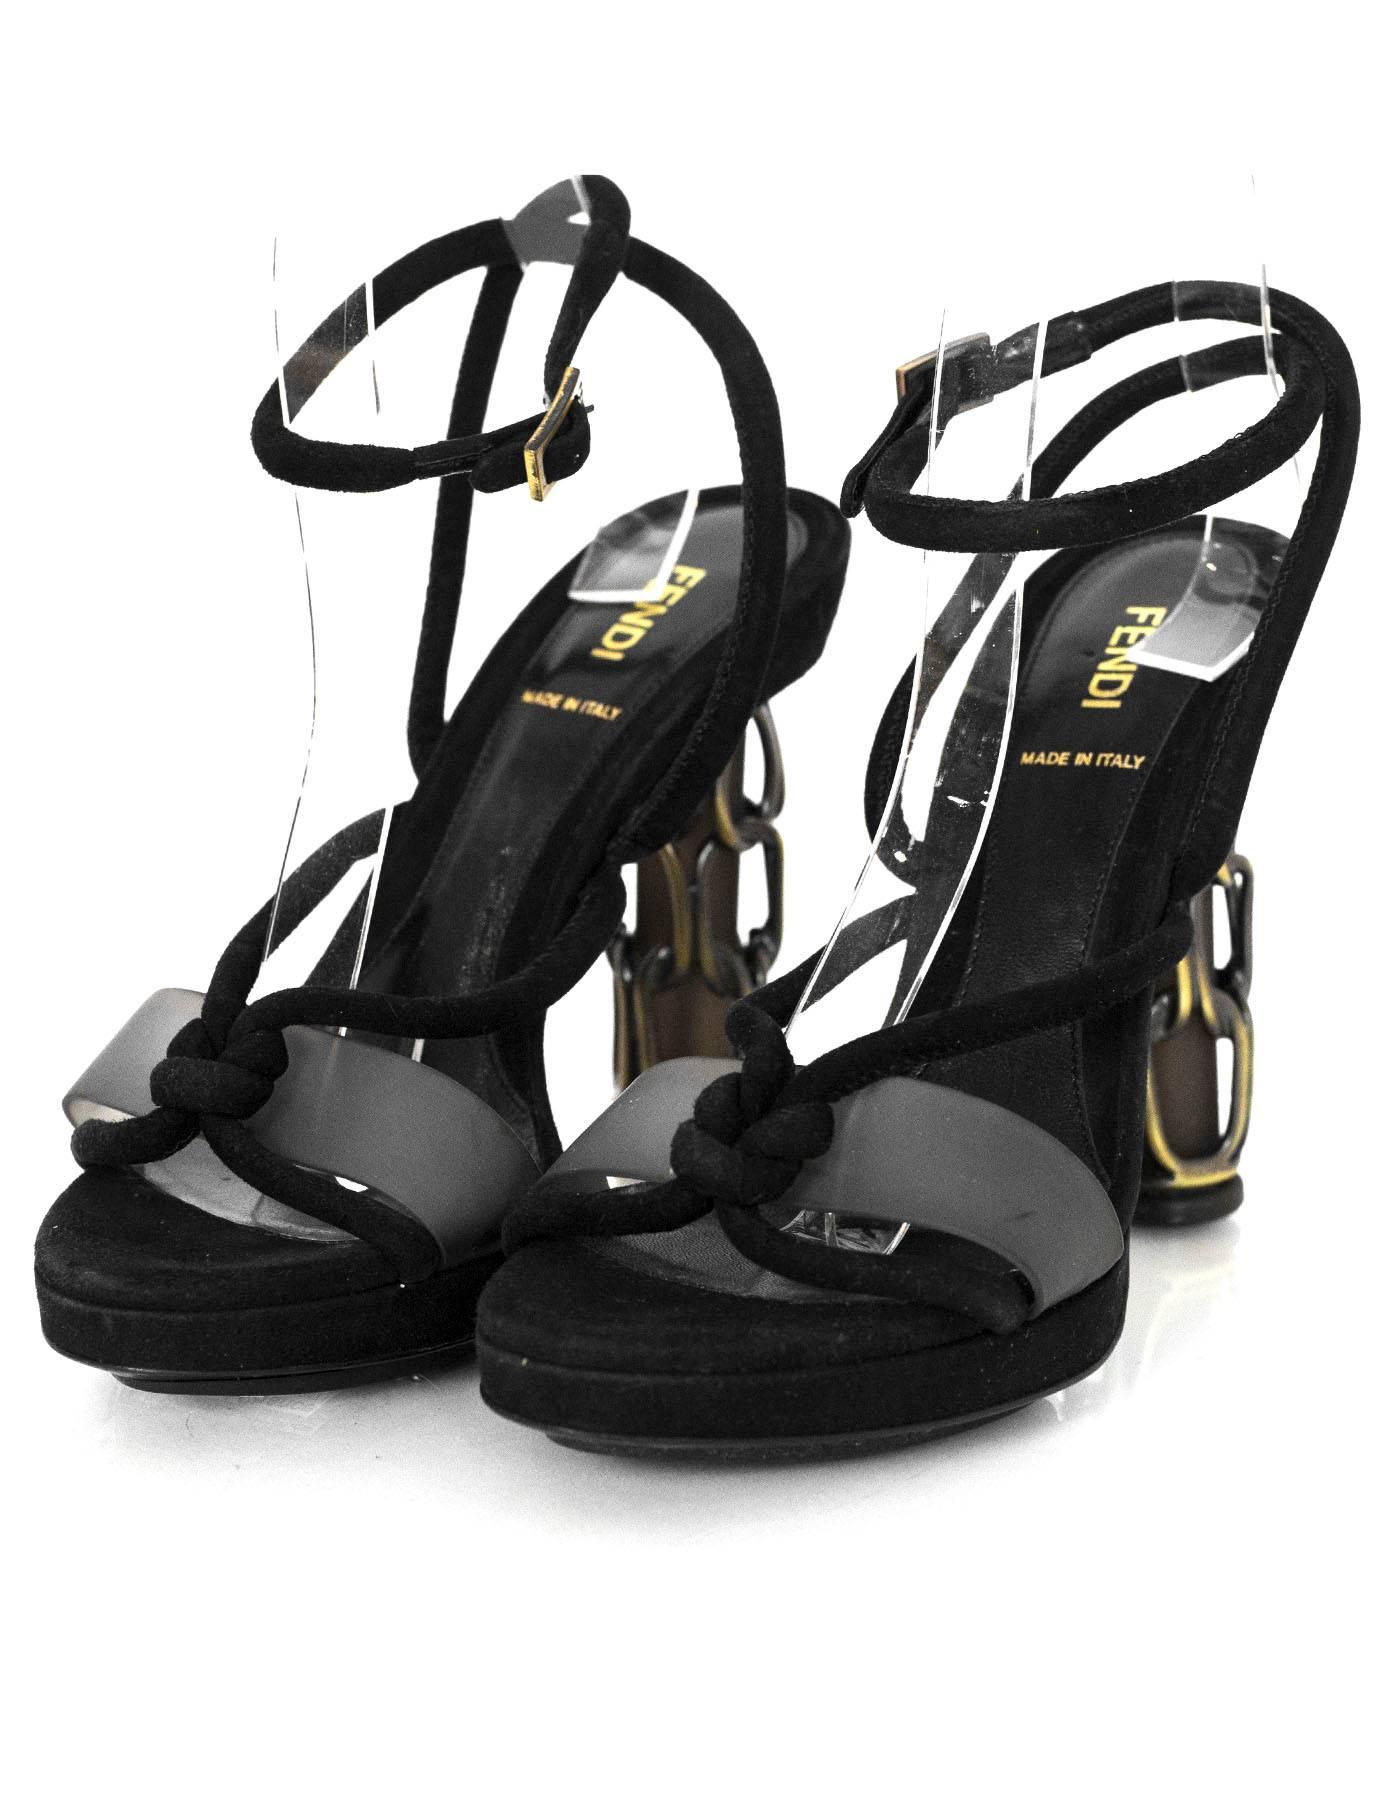 Fendi Black Suede Sandals with Caged Heels Sz 38

Features rubber strap at toes

Made In: Italy
Color: Black
Materials: Suede, metal
Closure/Opening: Buckle closure at ankle
Sole Stamp: Fendi Made in Italy Vero Cuoio 38
Overall Condition: Excellent